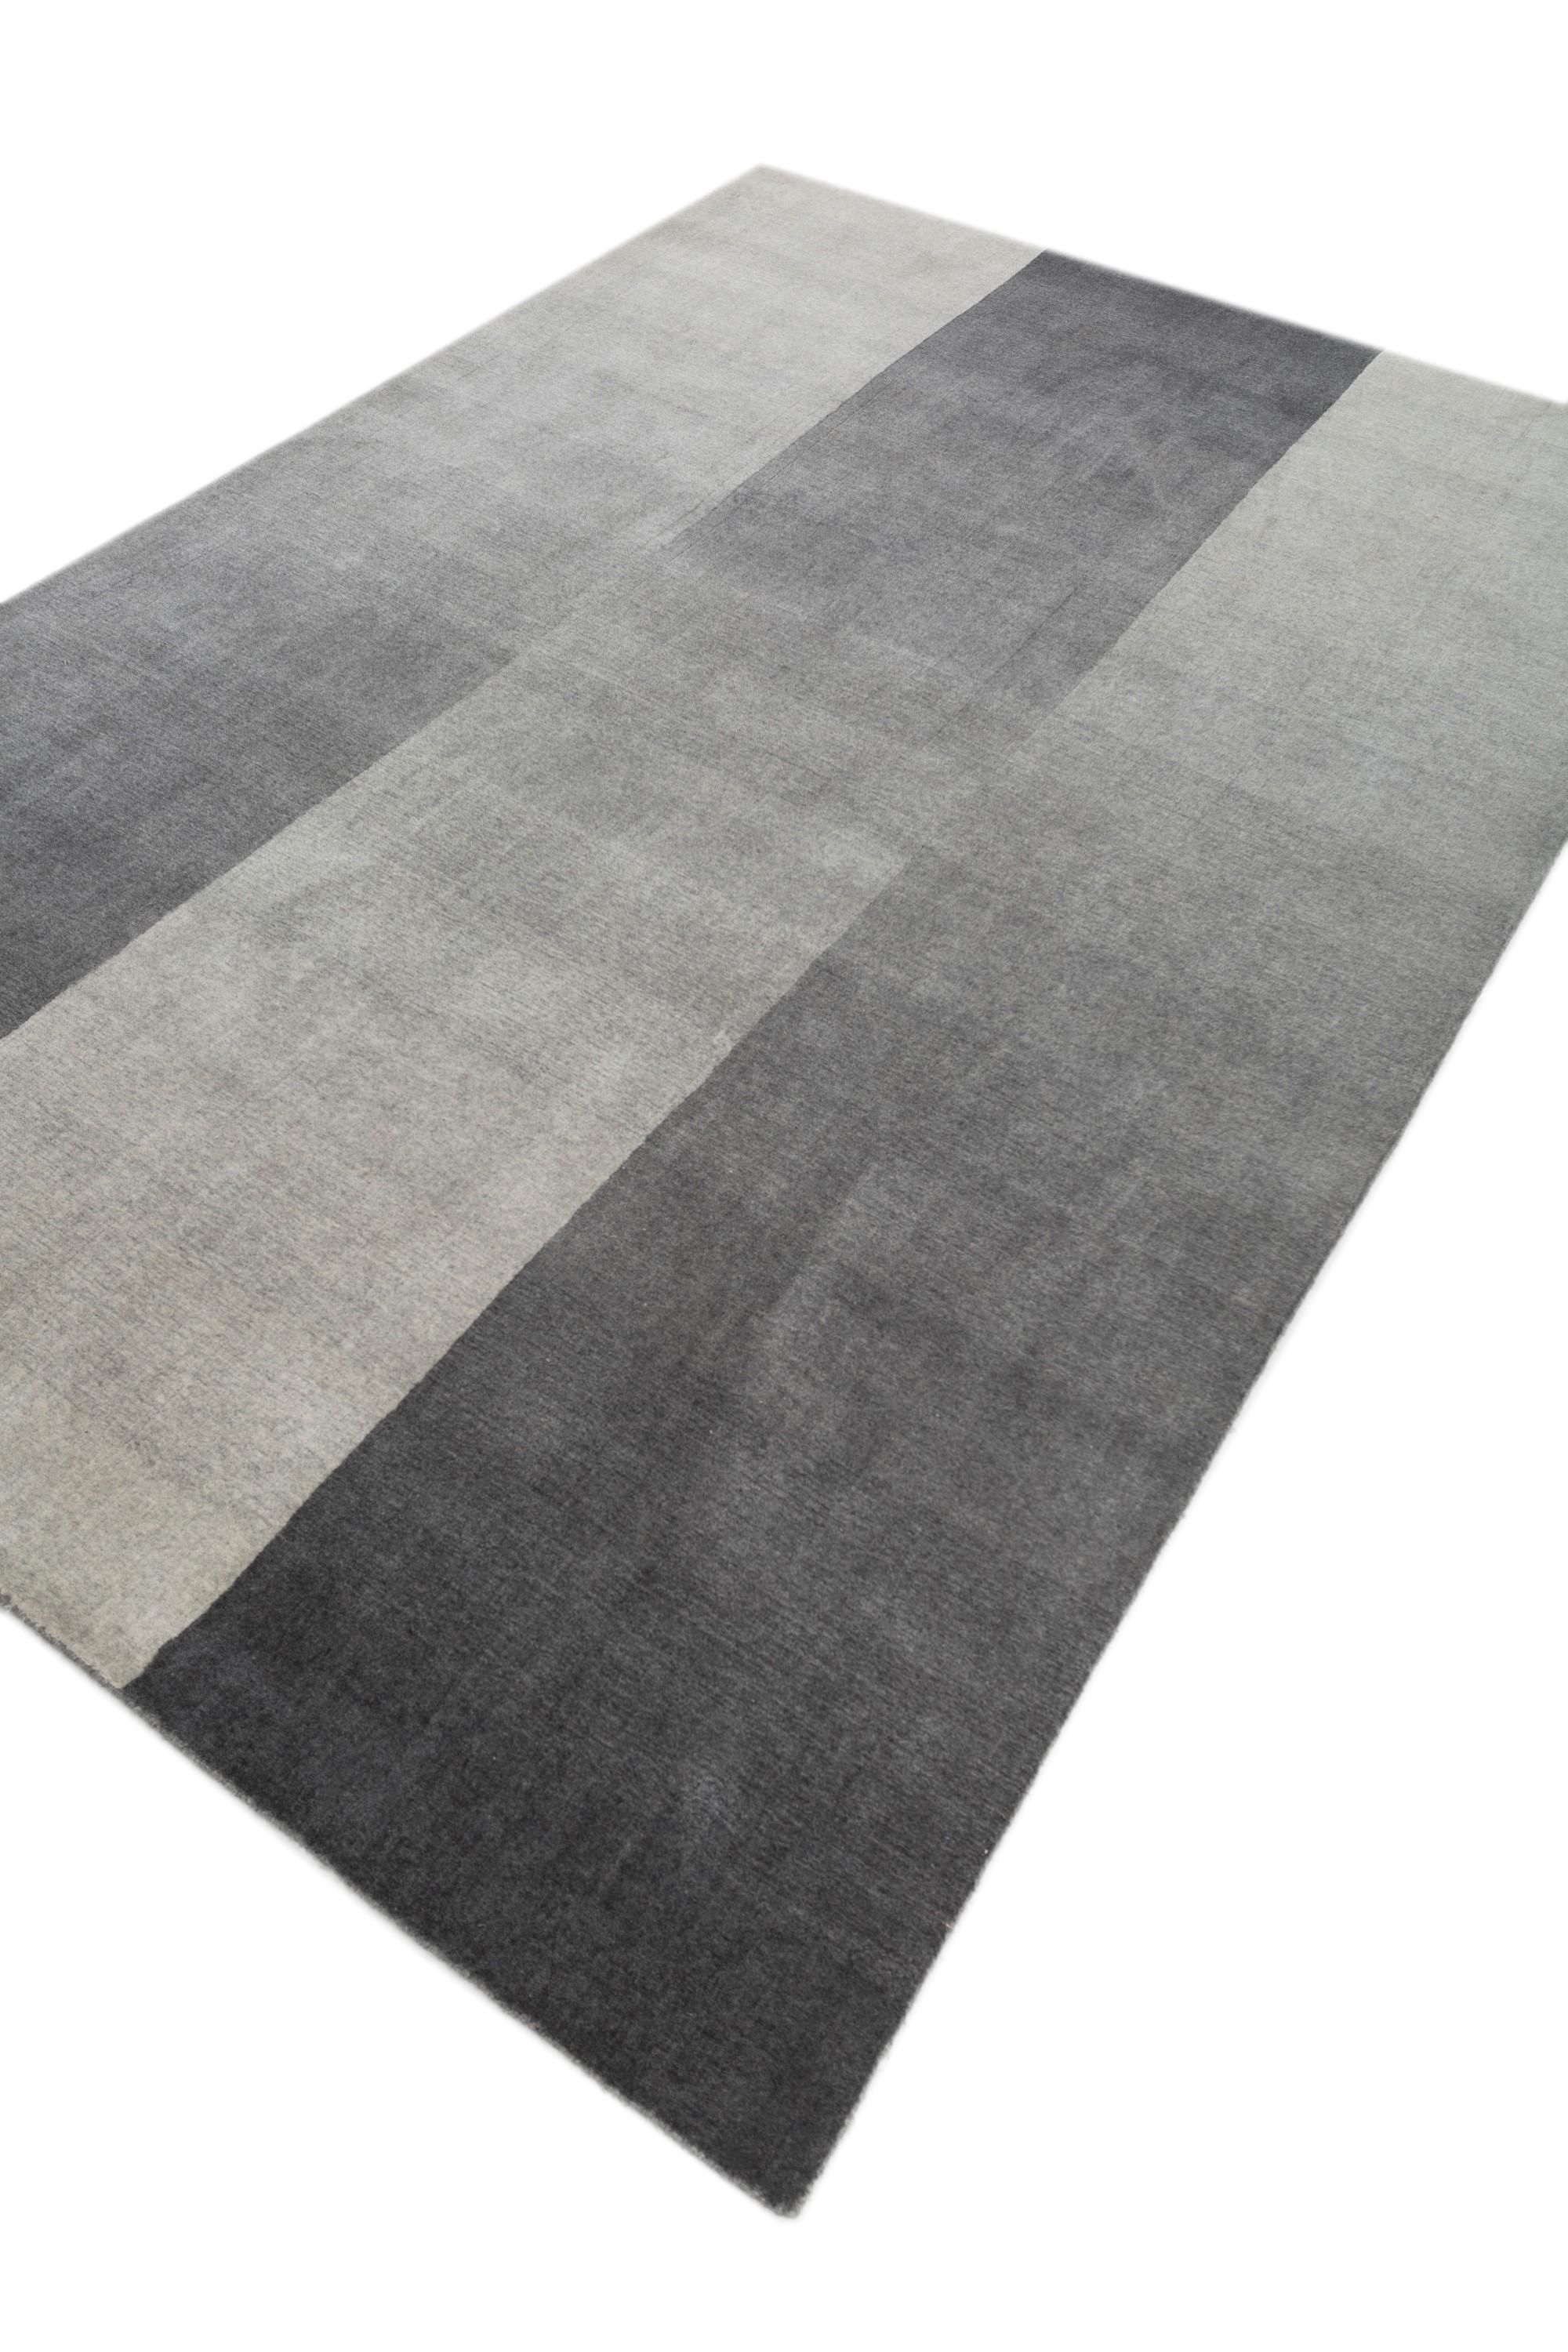 Are you ready to elevate your living space with understated elegance? Introducing our Modern Hand Loom rug—a mesmerizing journey of soothing colors intricately woven on a handloom. Crafted with high-quality yarns, each rug boasts simple yet elegant